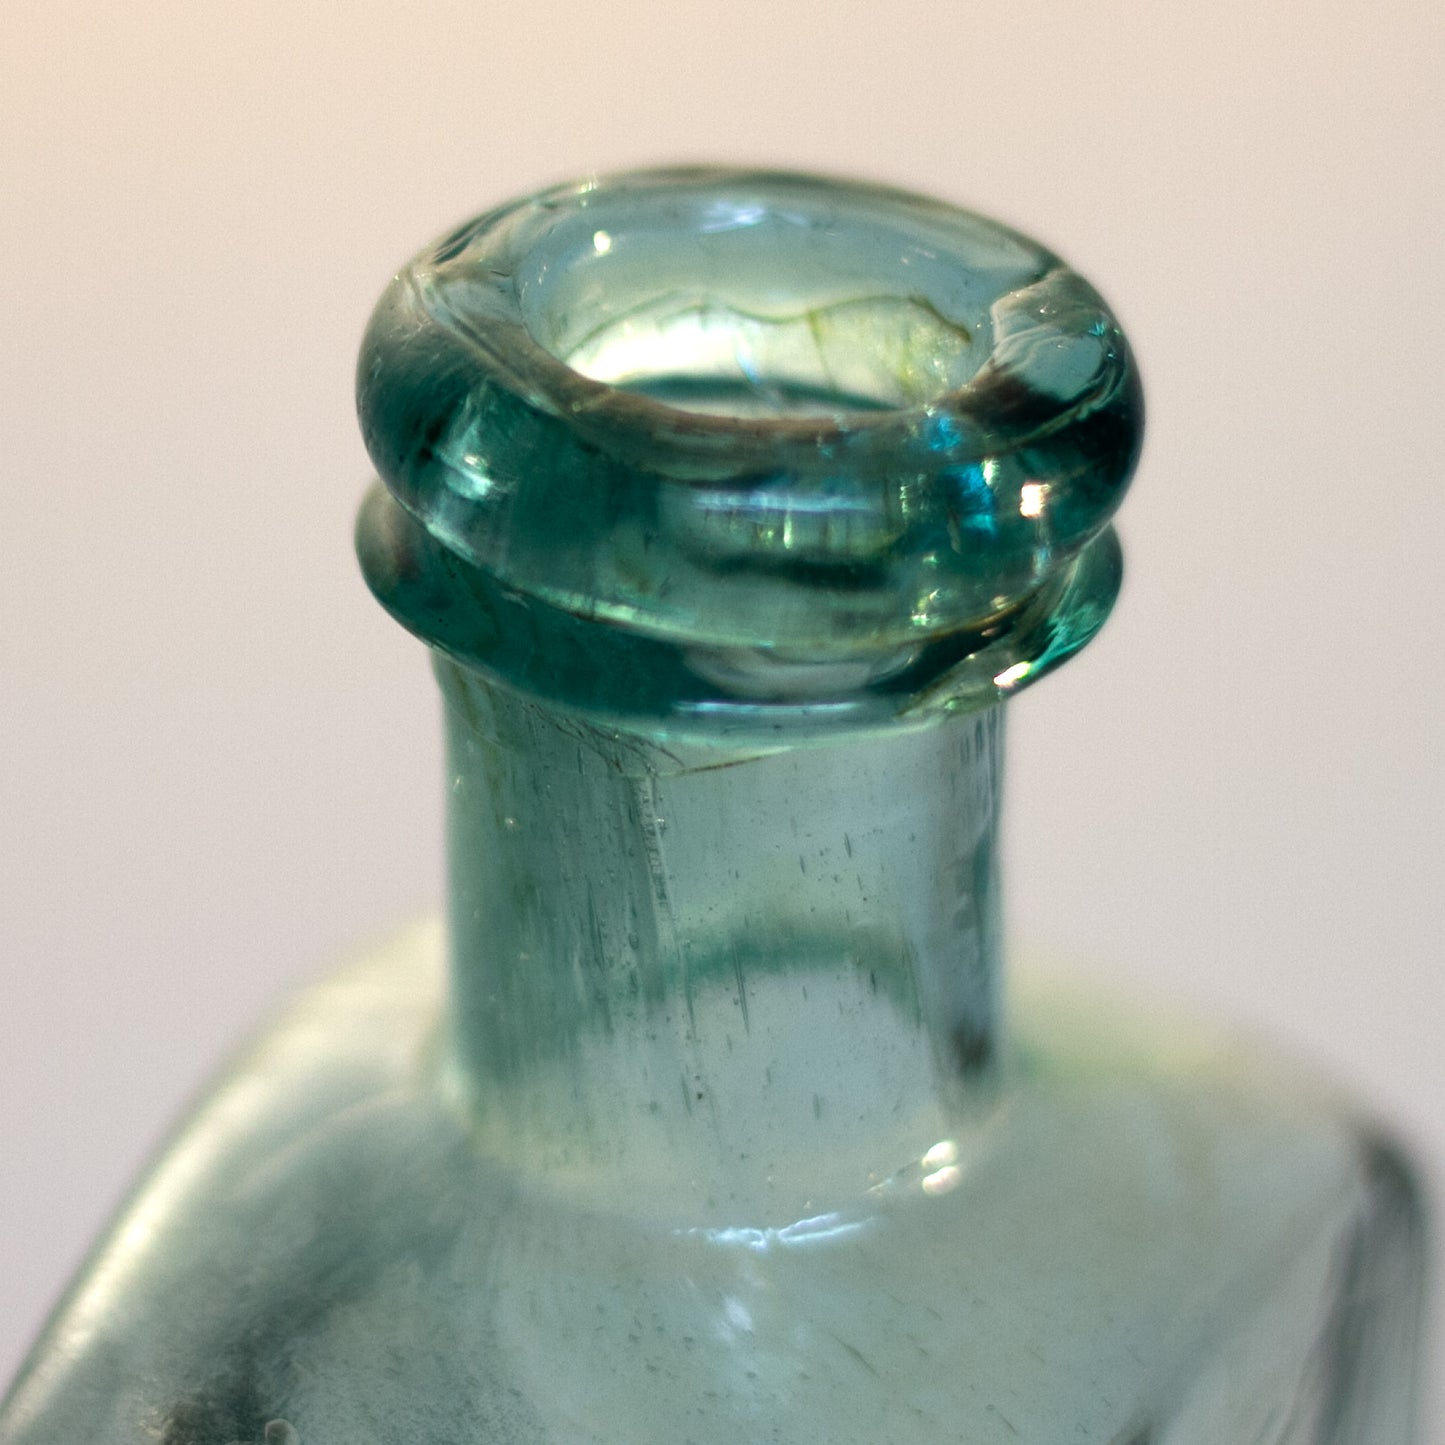 Early HALL'S BALSAM FOR THE LUNGS Aqua Glass Bottle Circa 1860 - 1870